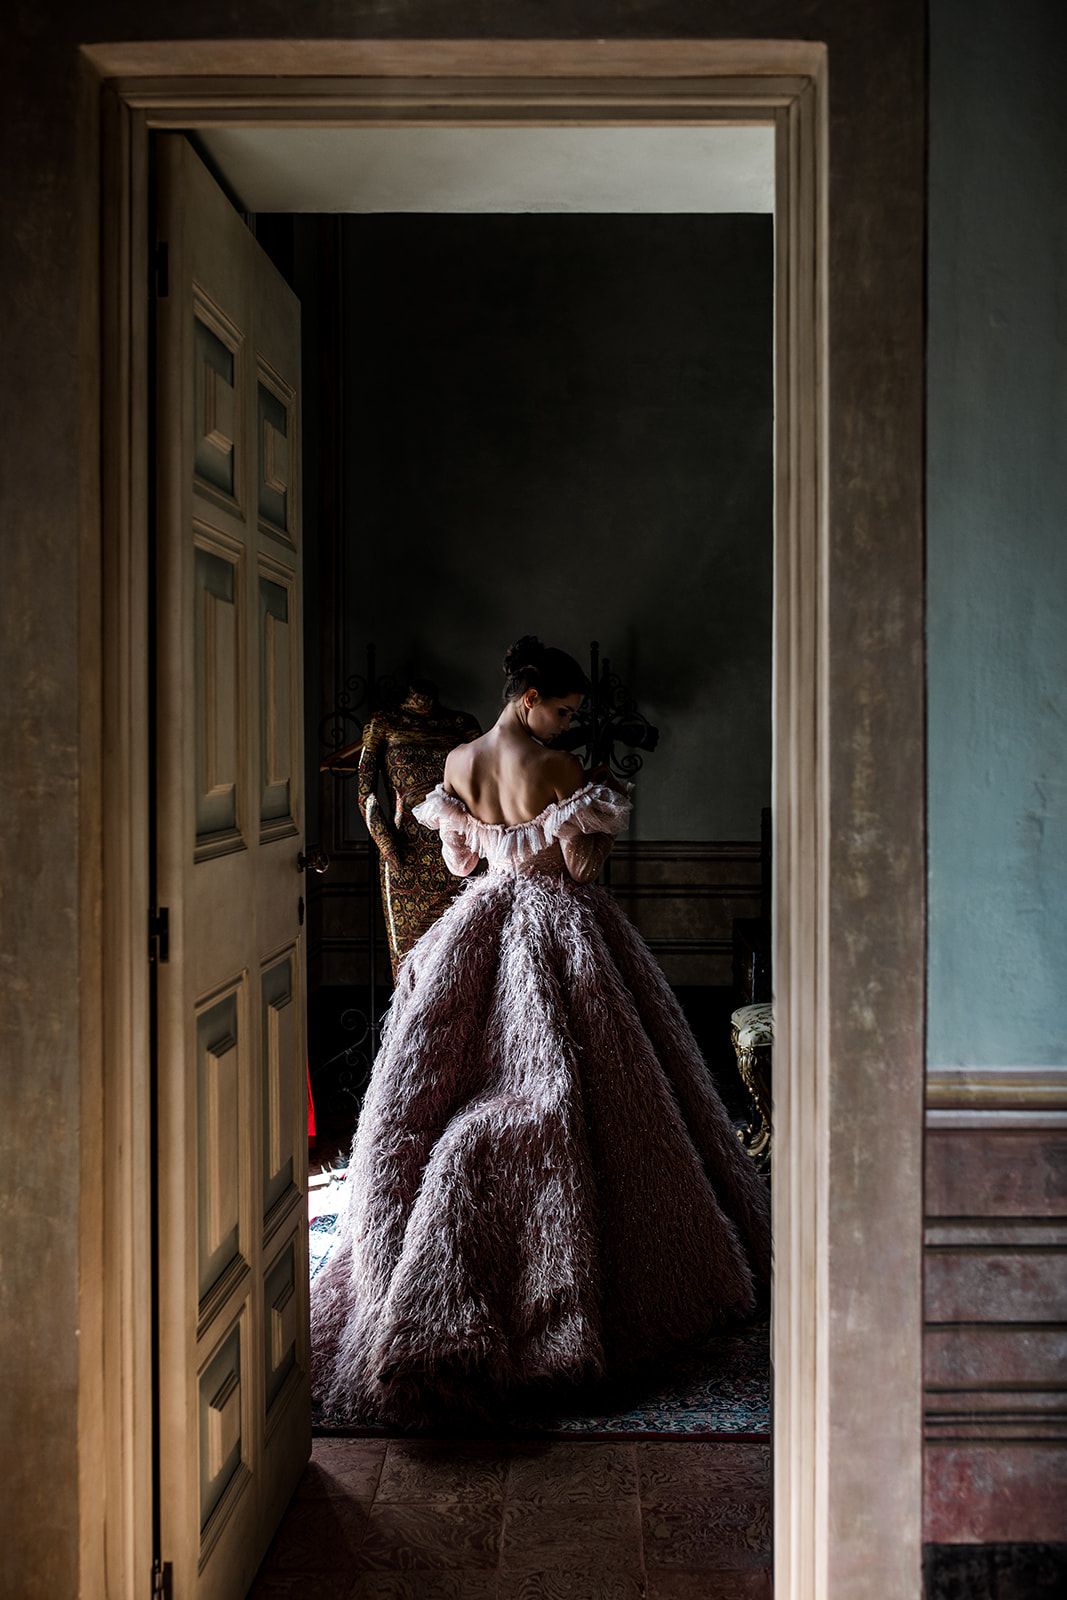 Bride slips into pink couture gown standing in doorway at Villa Balbiano